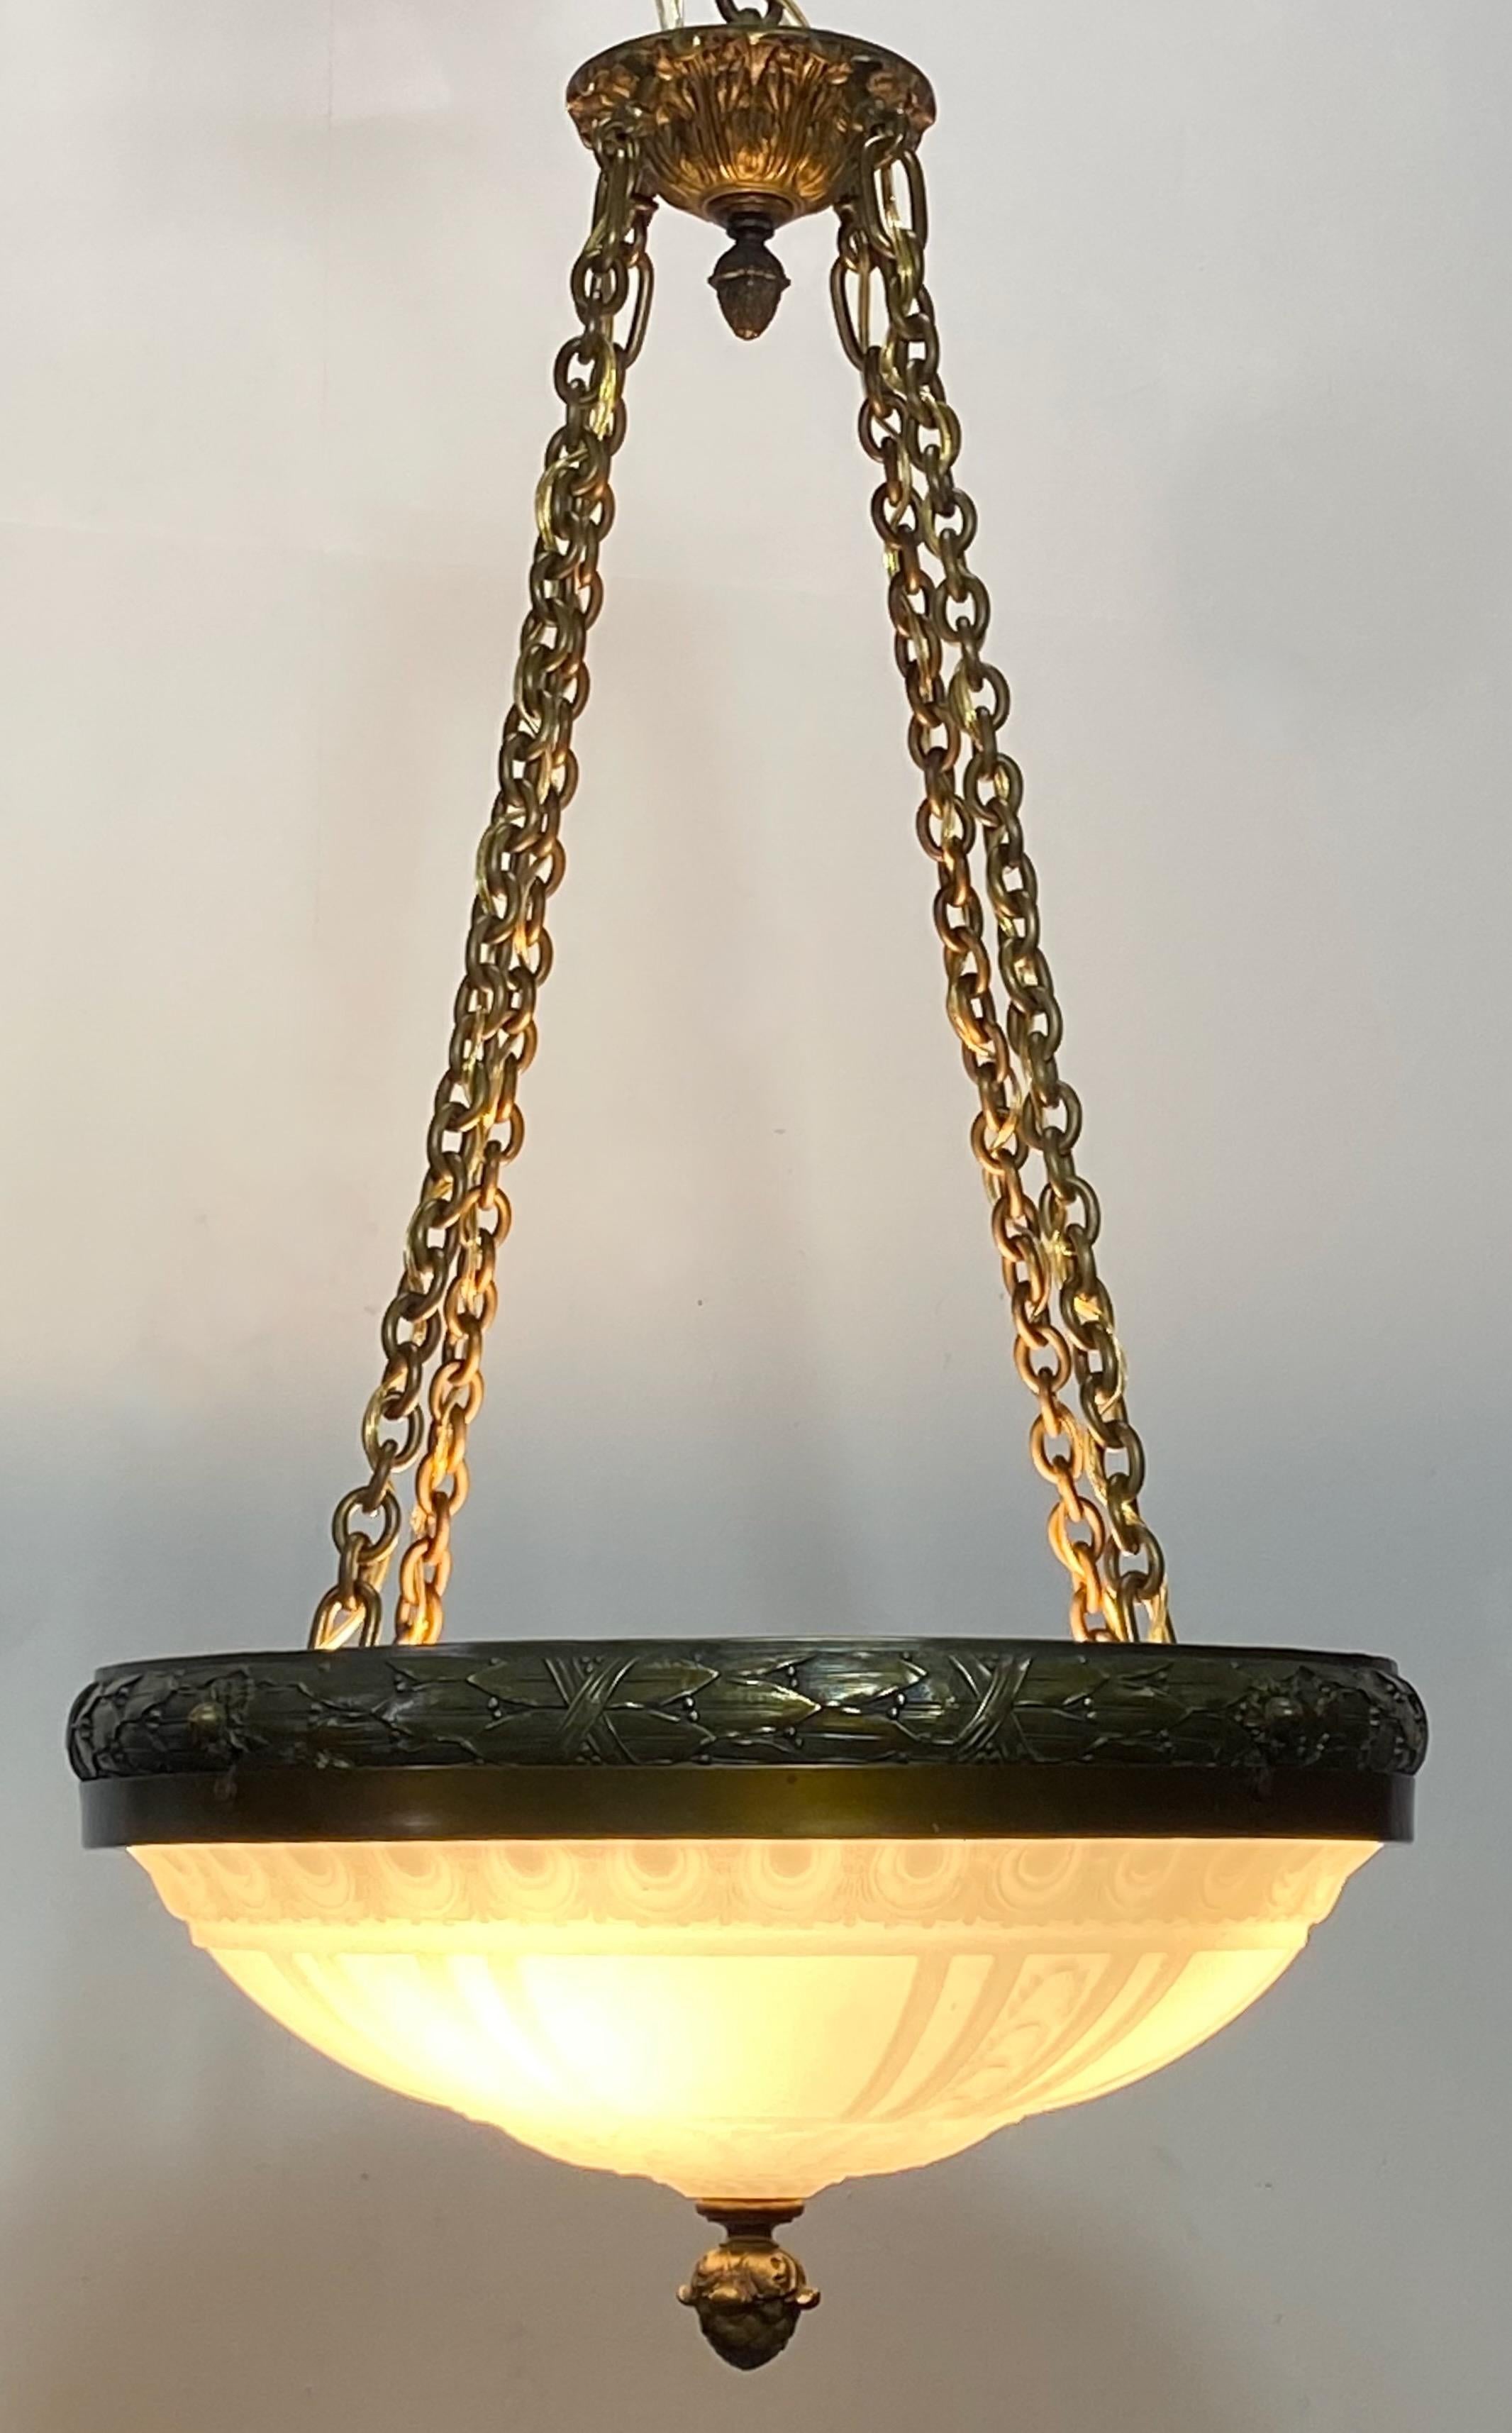 An exceptional neoclassical style pendant ceiling light fixture.
Calcite cast glass bowl with wonderfully detailed brass outer ring, brass hardware and acorn finial.
American, early 20th century, circa 1915.
Restored and rewired.
Beautiful